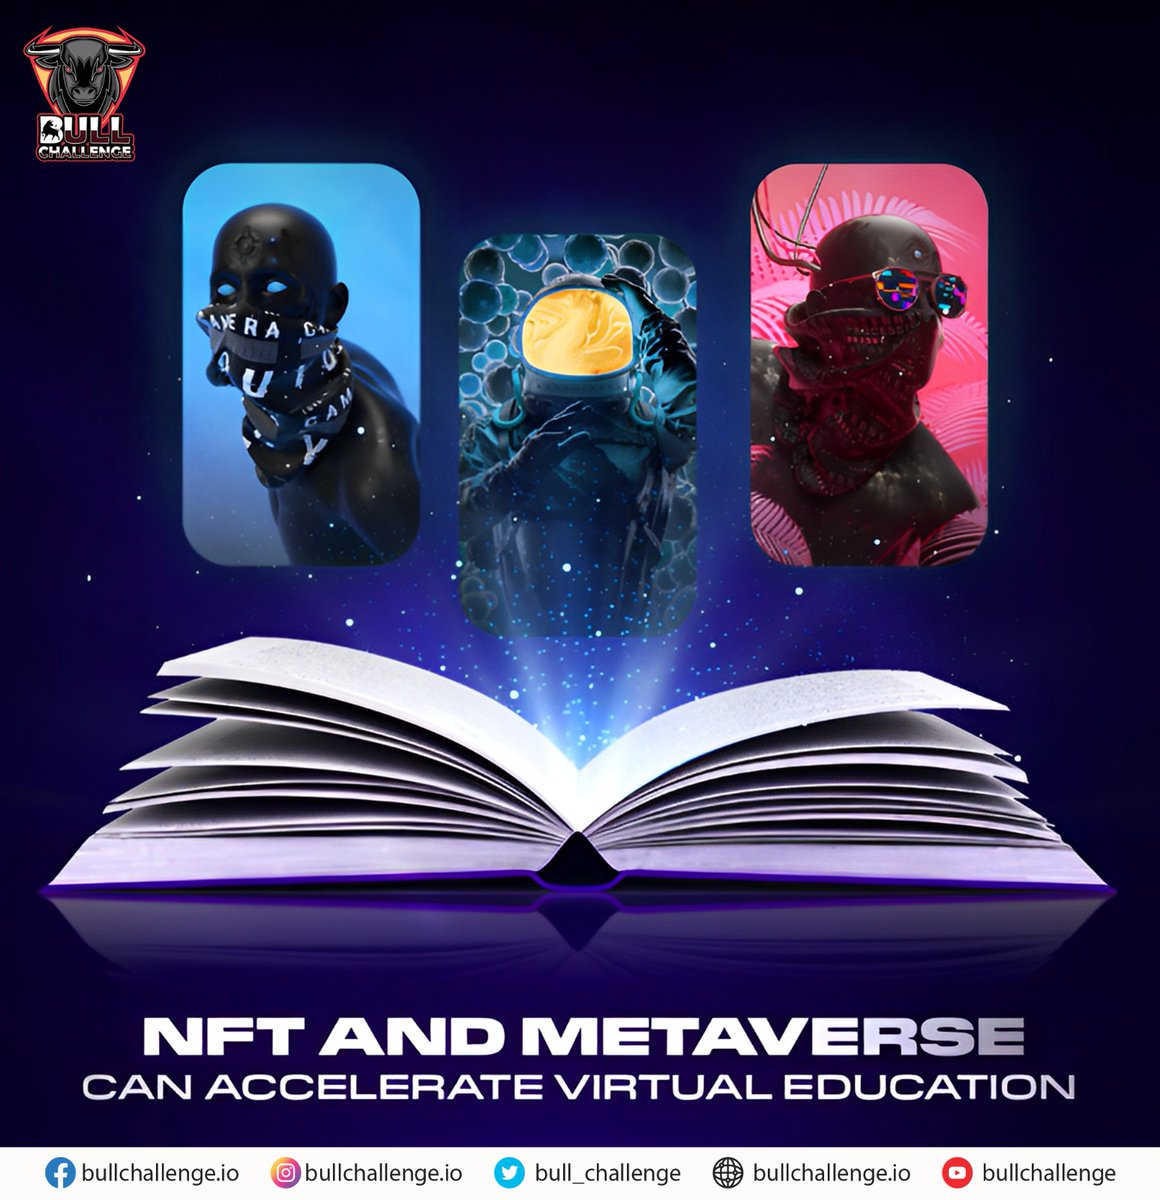 Excited to see how #NFTs and the #Metaverse can revolutionize virtual education! Imagine a world where online learning is not just interactive, but immersive and personalized with the help of blockchain technology 💡 #VirtualEducation #edtech